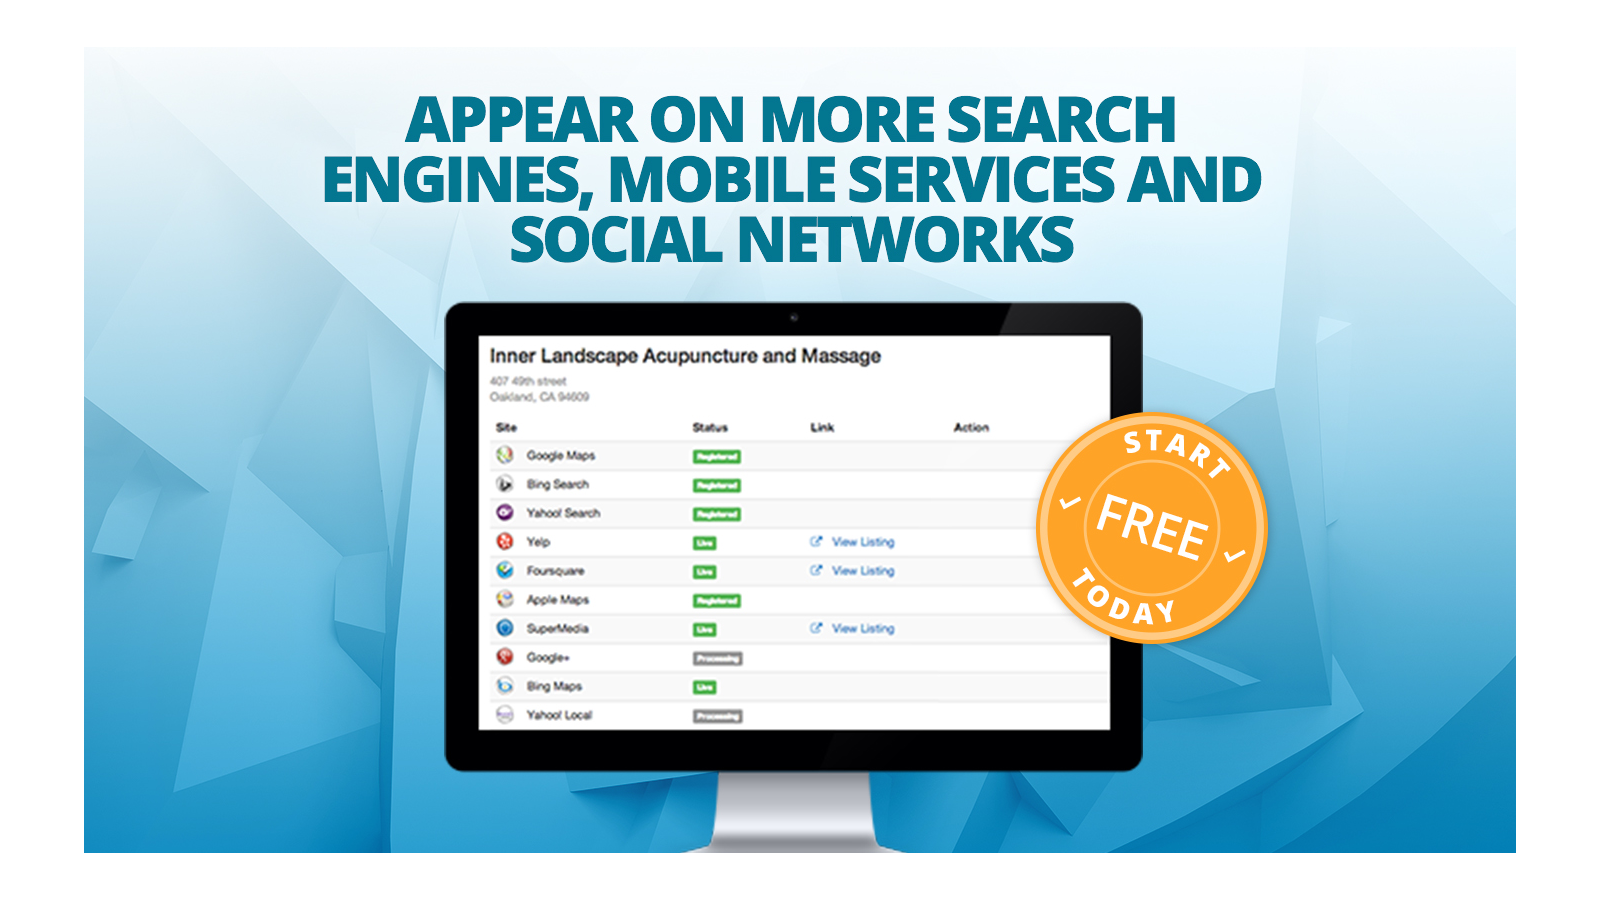 Appear on more search engines, mobile services & social networks